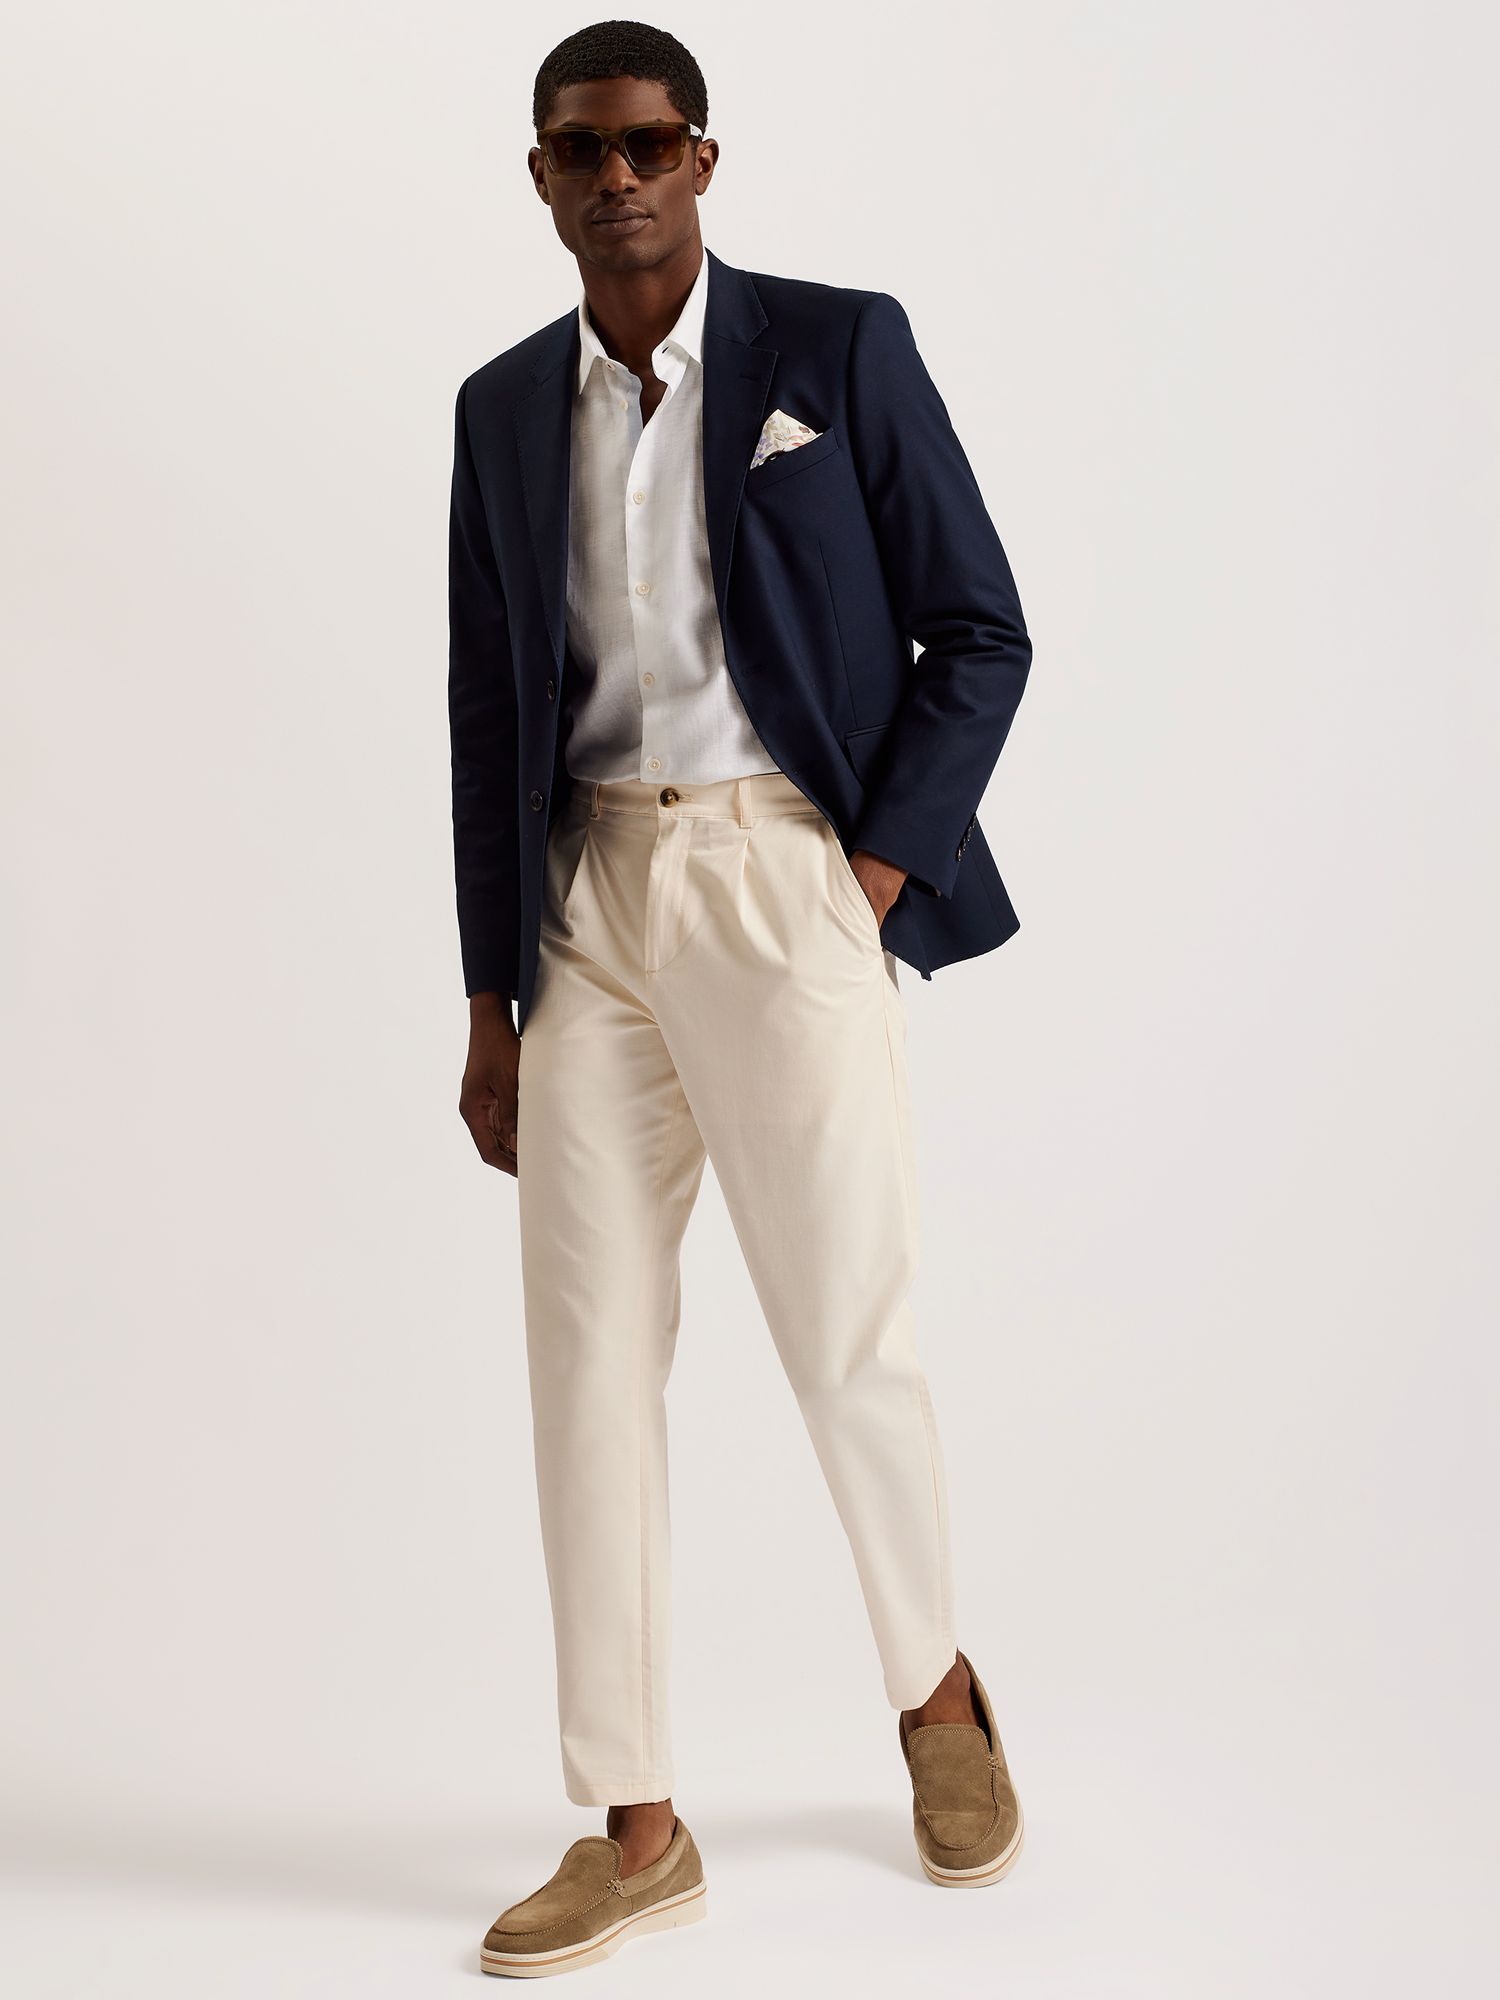 Buy Ted Baker Compact Cotton Blazer Online at johnlewis.com